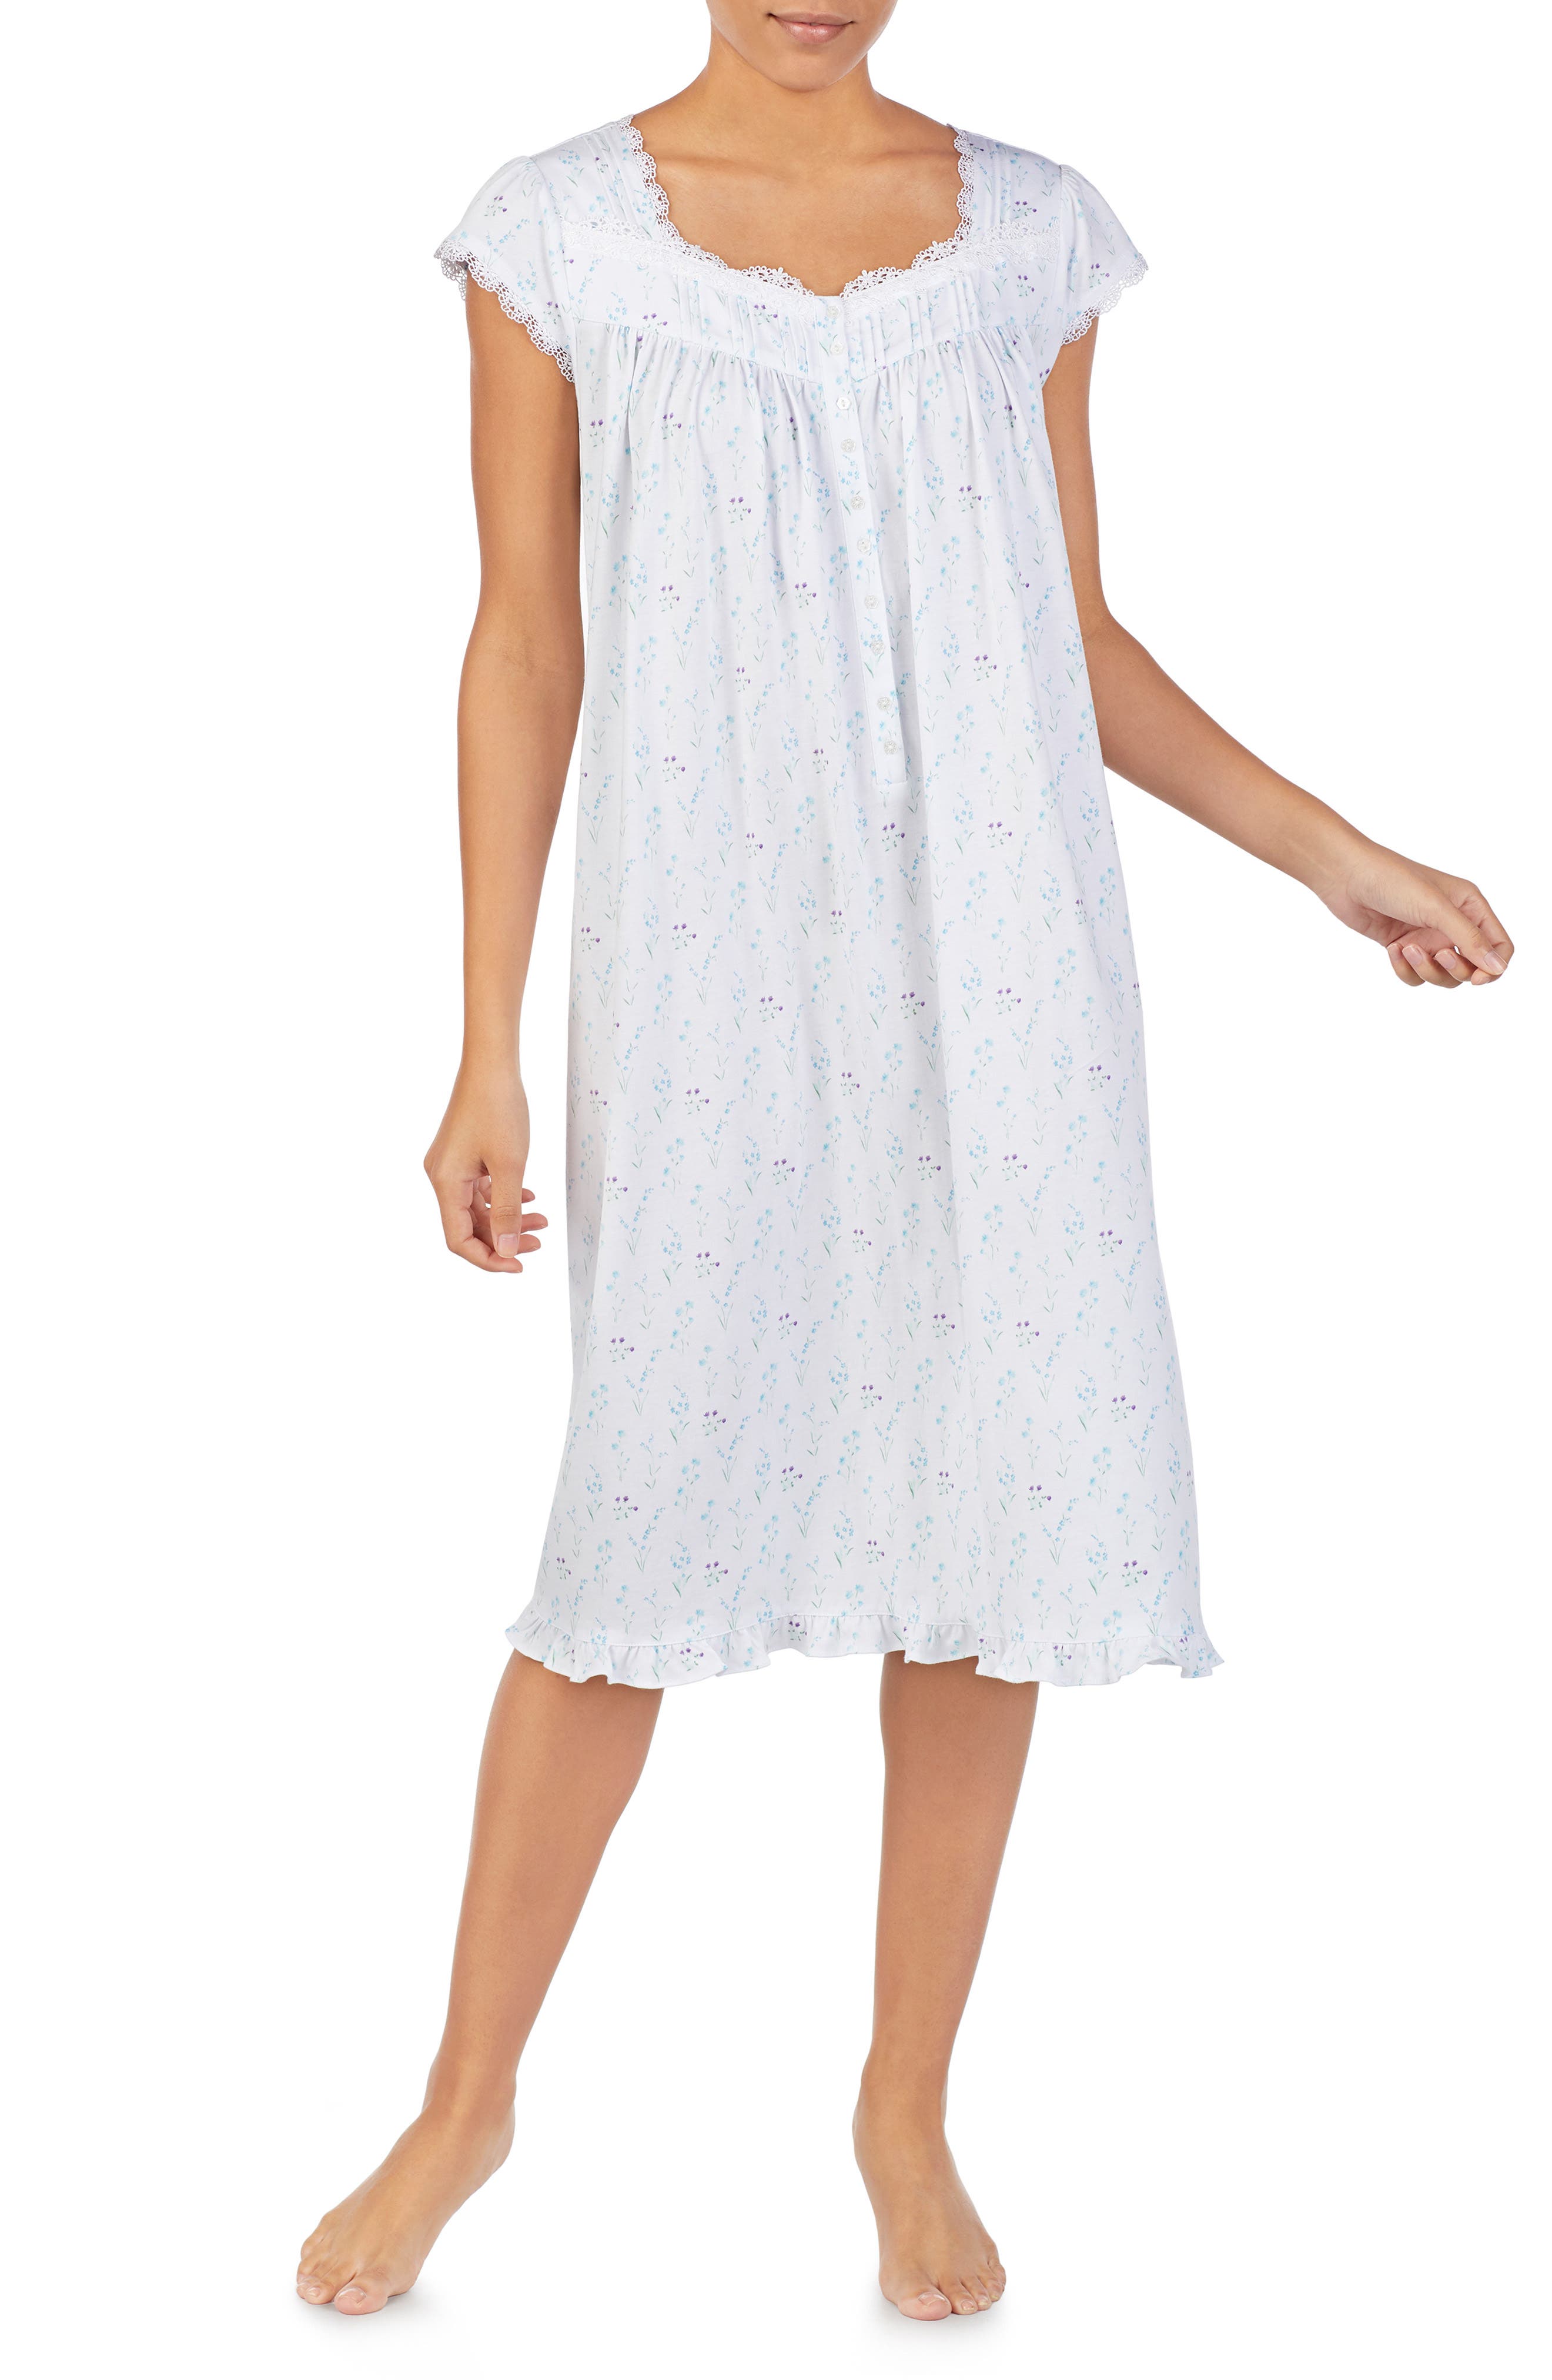 Women's Nightdresses / Nightgowns - Country / Outdoors Clothing